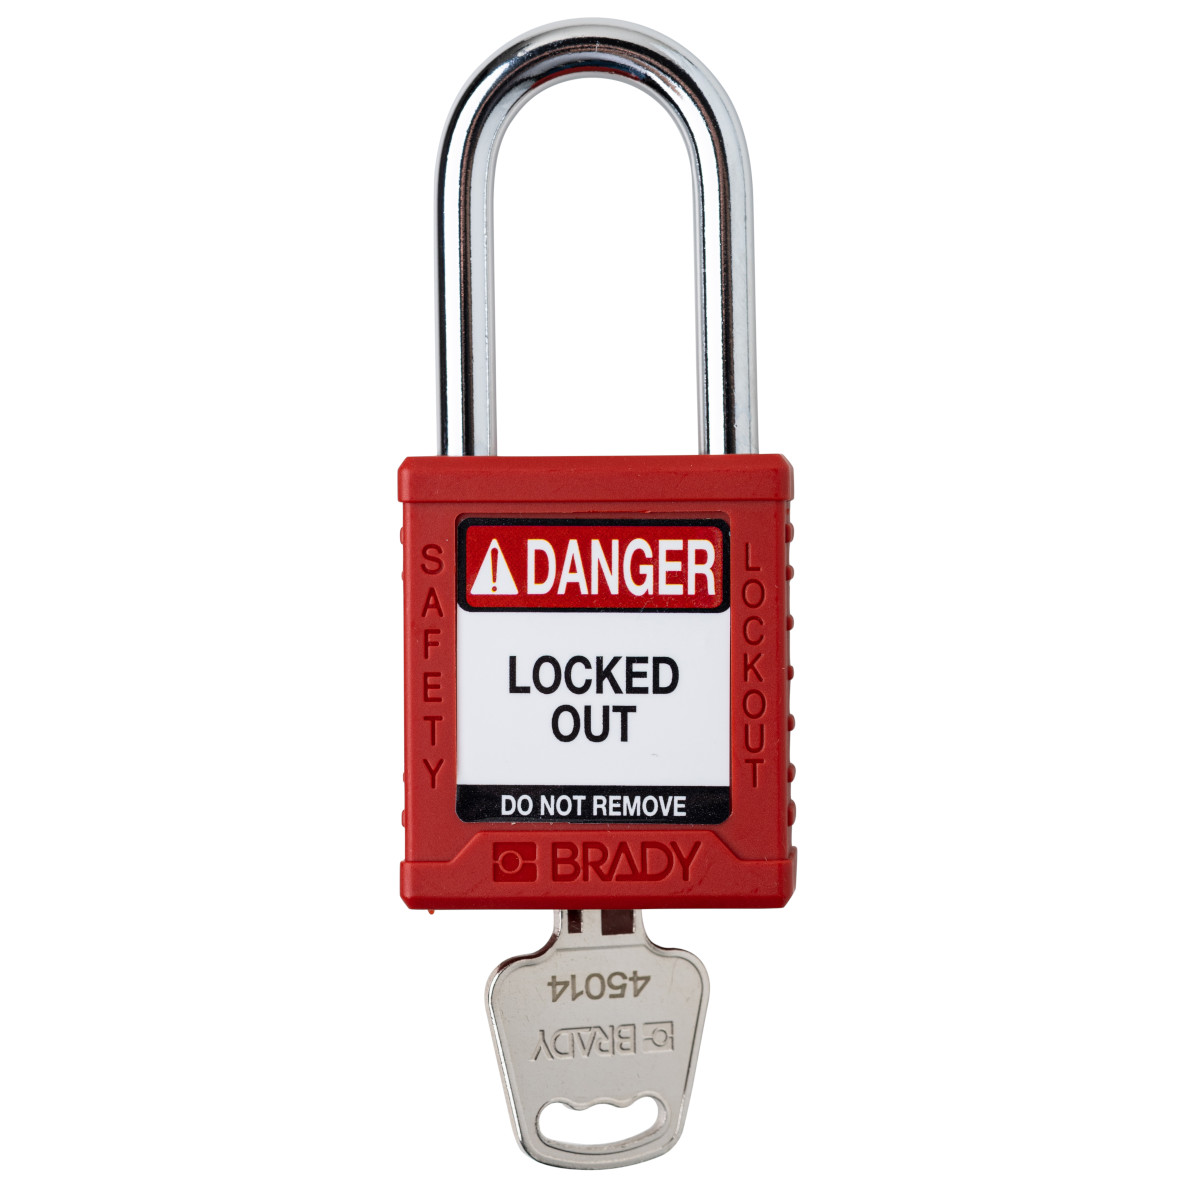 Master Lock Brass Identification Tags (bag of 12) - Lockout Tagout